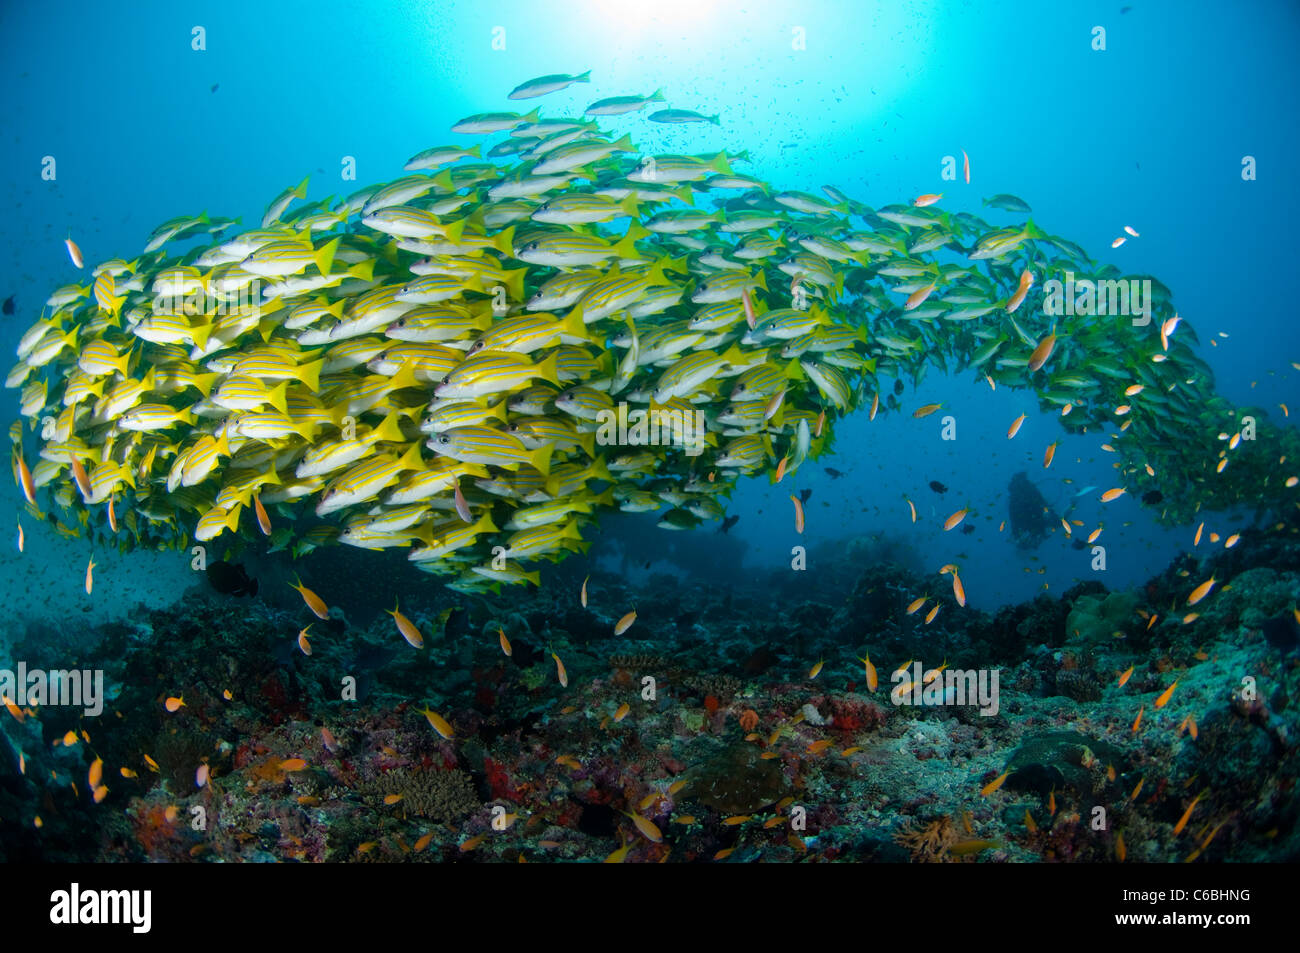 Large school of Bluelined Snappers, Lutjanus kasmira, over reef, silhouette of diver in background, North Male Atoll, Maldives Stock Photo